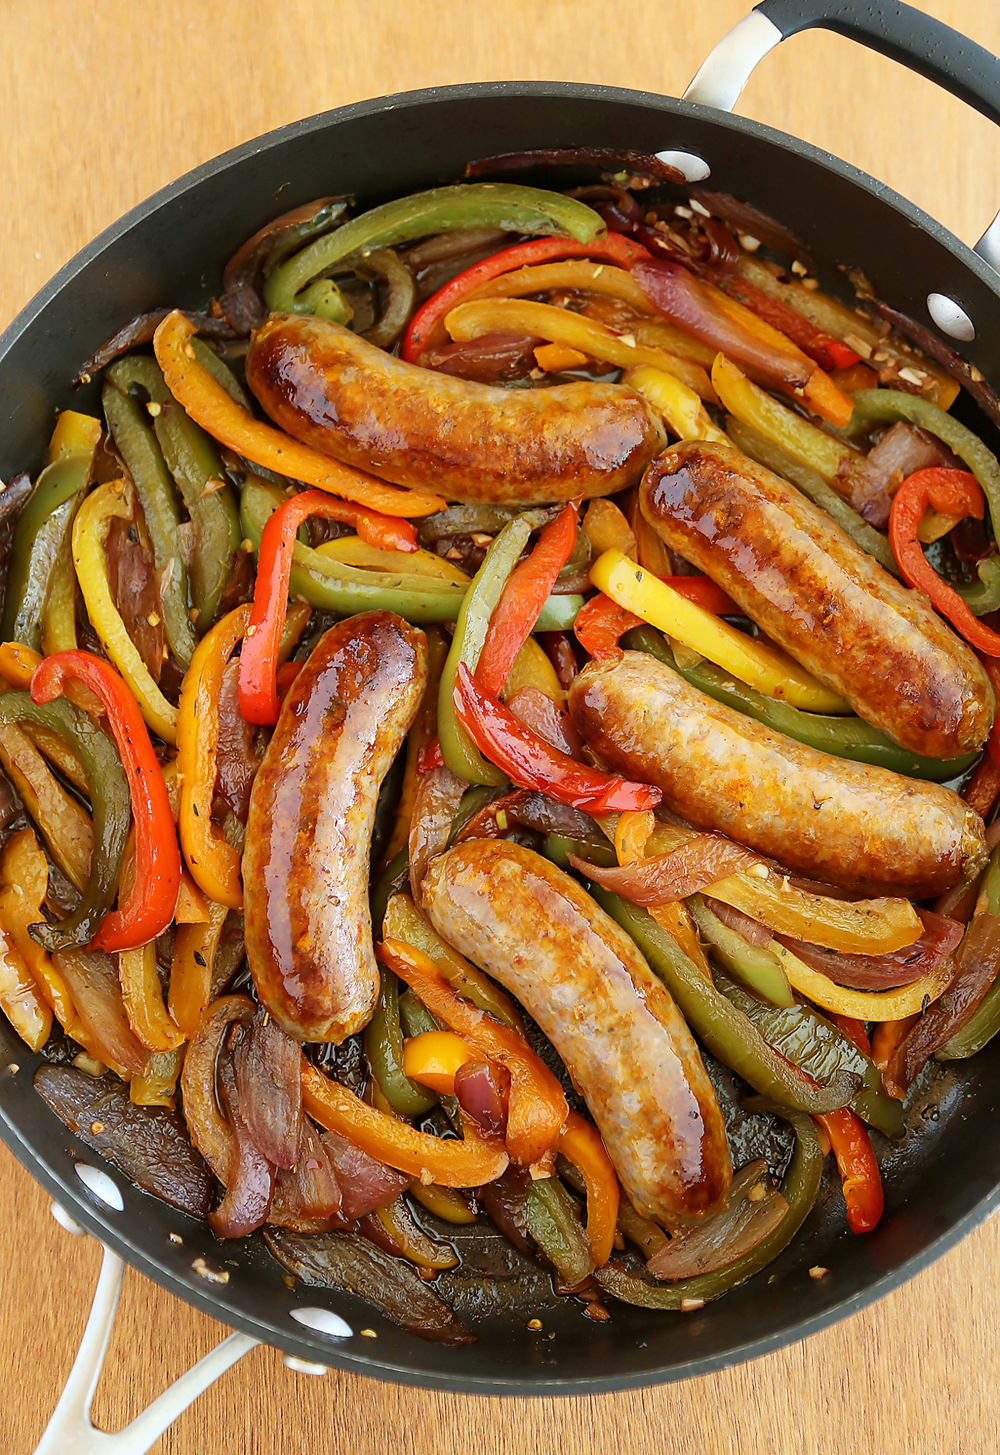 http://www.thecomfortofcooking.com/wp-content/uploads/2015/01/Skillet_Italian_Sausage_Peppers-6.jpg